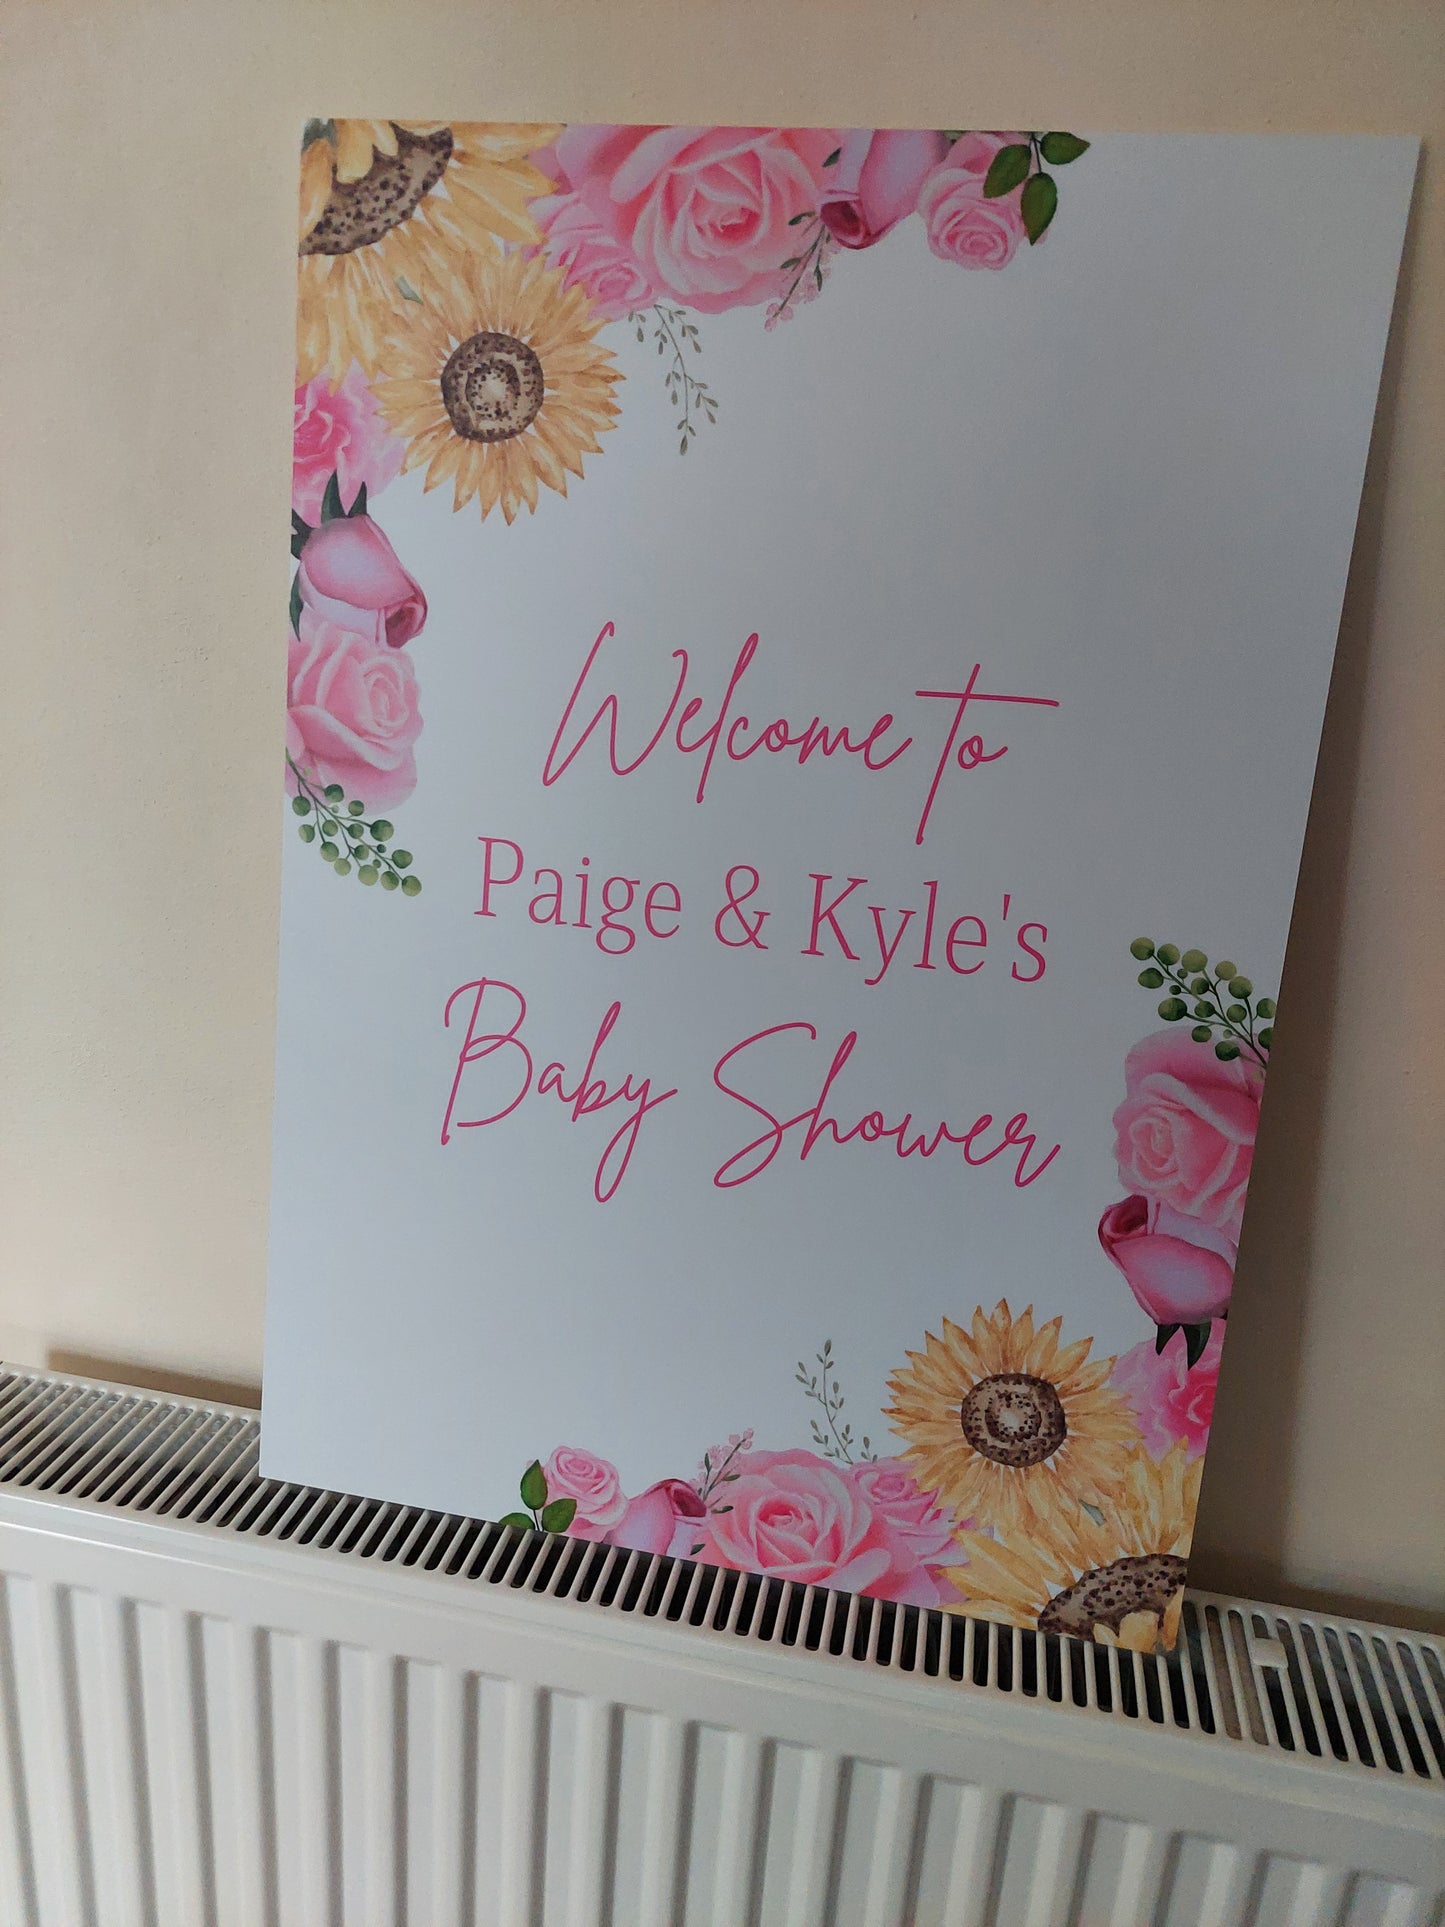 Personalised Floral Pink Yellow Sunflower & Roses Welcome Board Sign | Birthday Board | Christening Board | Baby Shower Board | Party Sign | A4, A3, A2